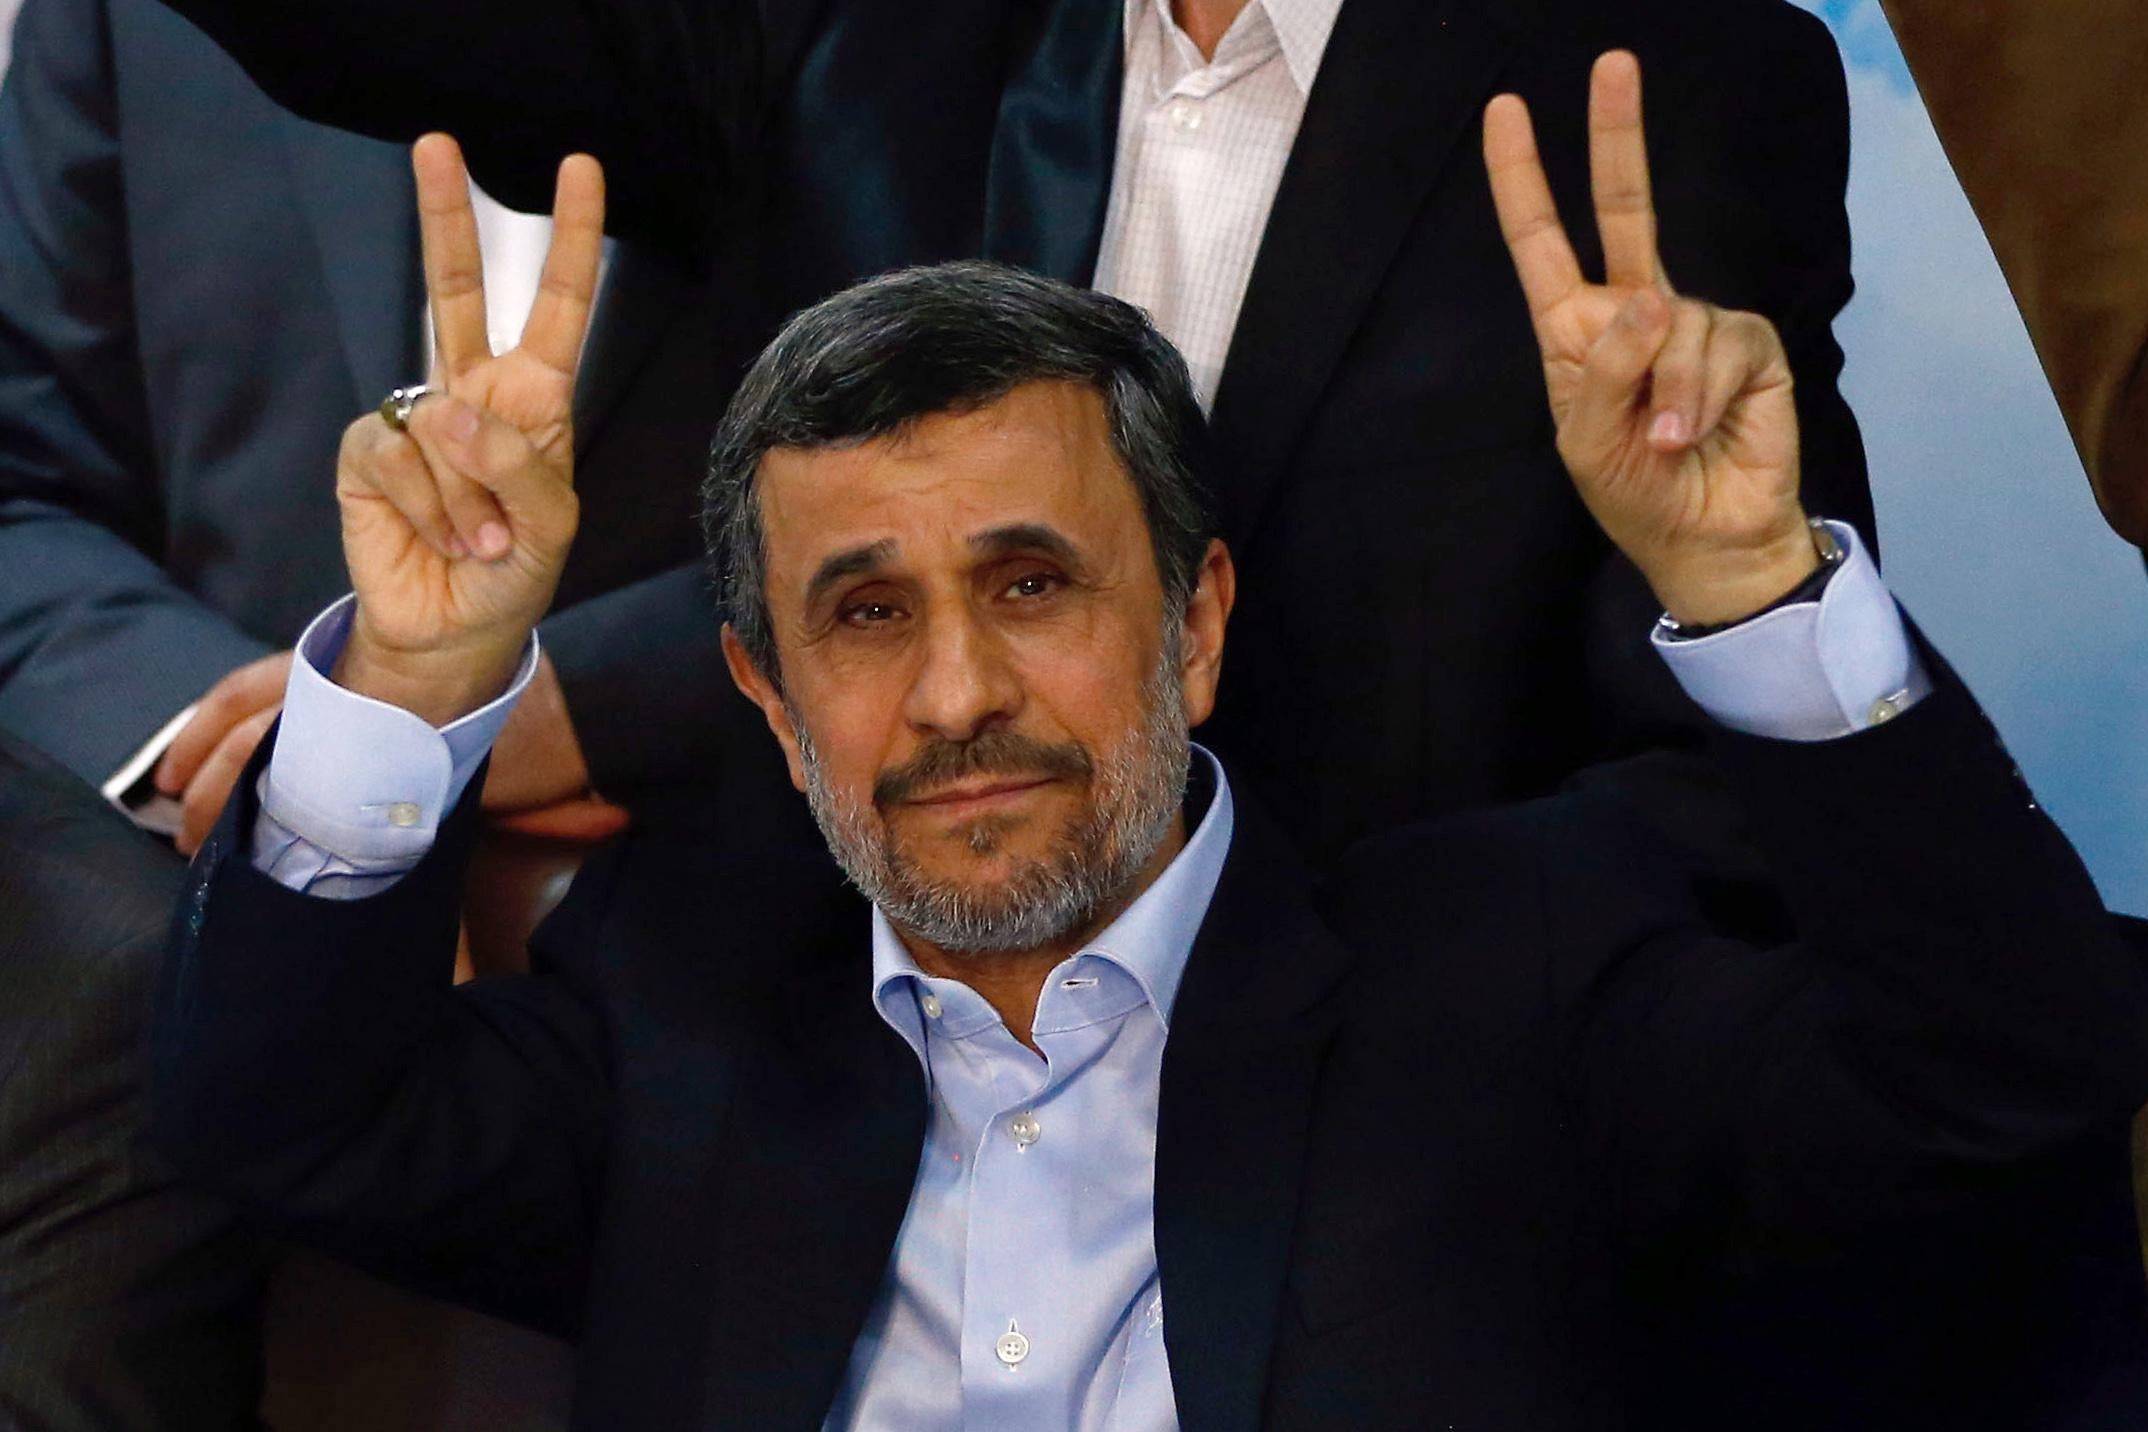 Former Iranian president Mahmoud Ahmadinejad (C) flashes the sign for victory at the Interior Ministry's election headquarters as candidates begin to sign up for the upcoming presidential elections in Tehran on April 12, 2017.Ahmadinejad had previously said he would not stand after being advised not to by supreme leader Ayatollah Ali Khamenei, saying he would instead support his former deputy Hamid Baghaie who also registered on Wednesday.